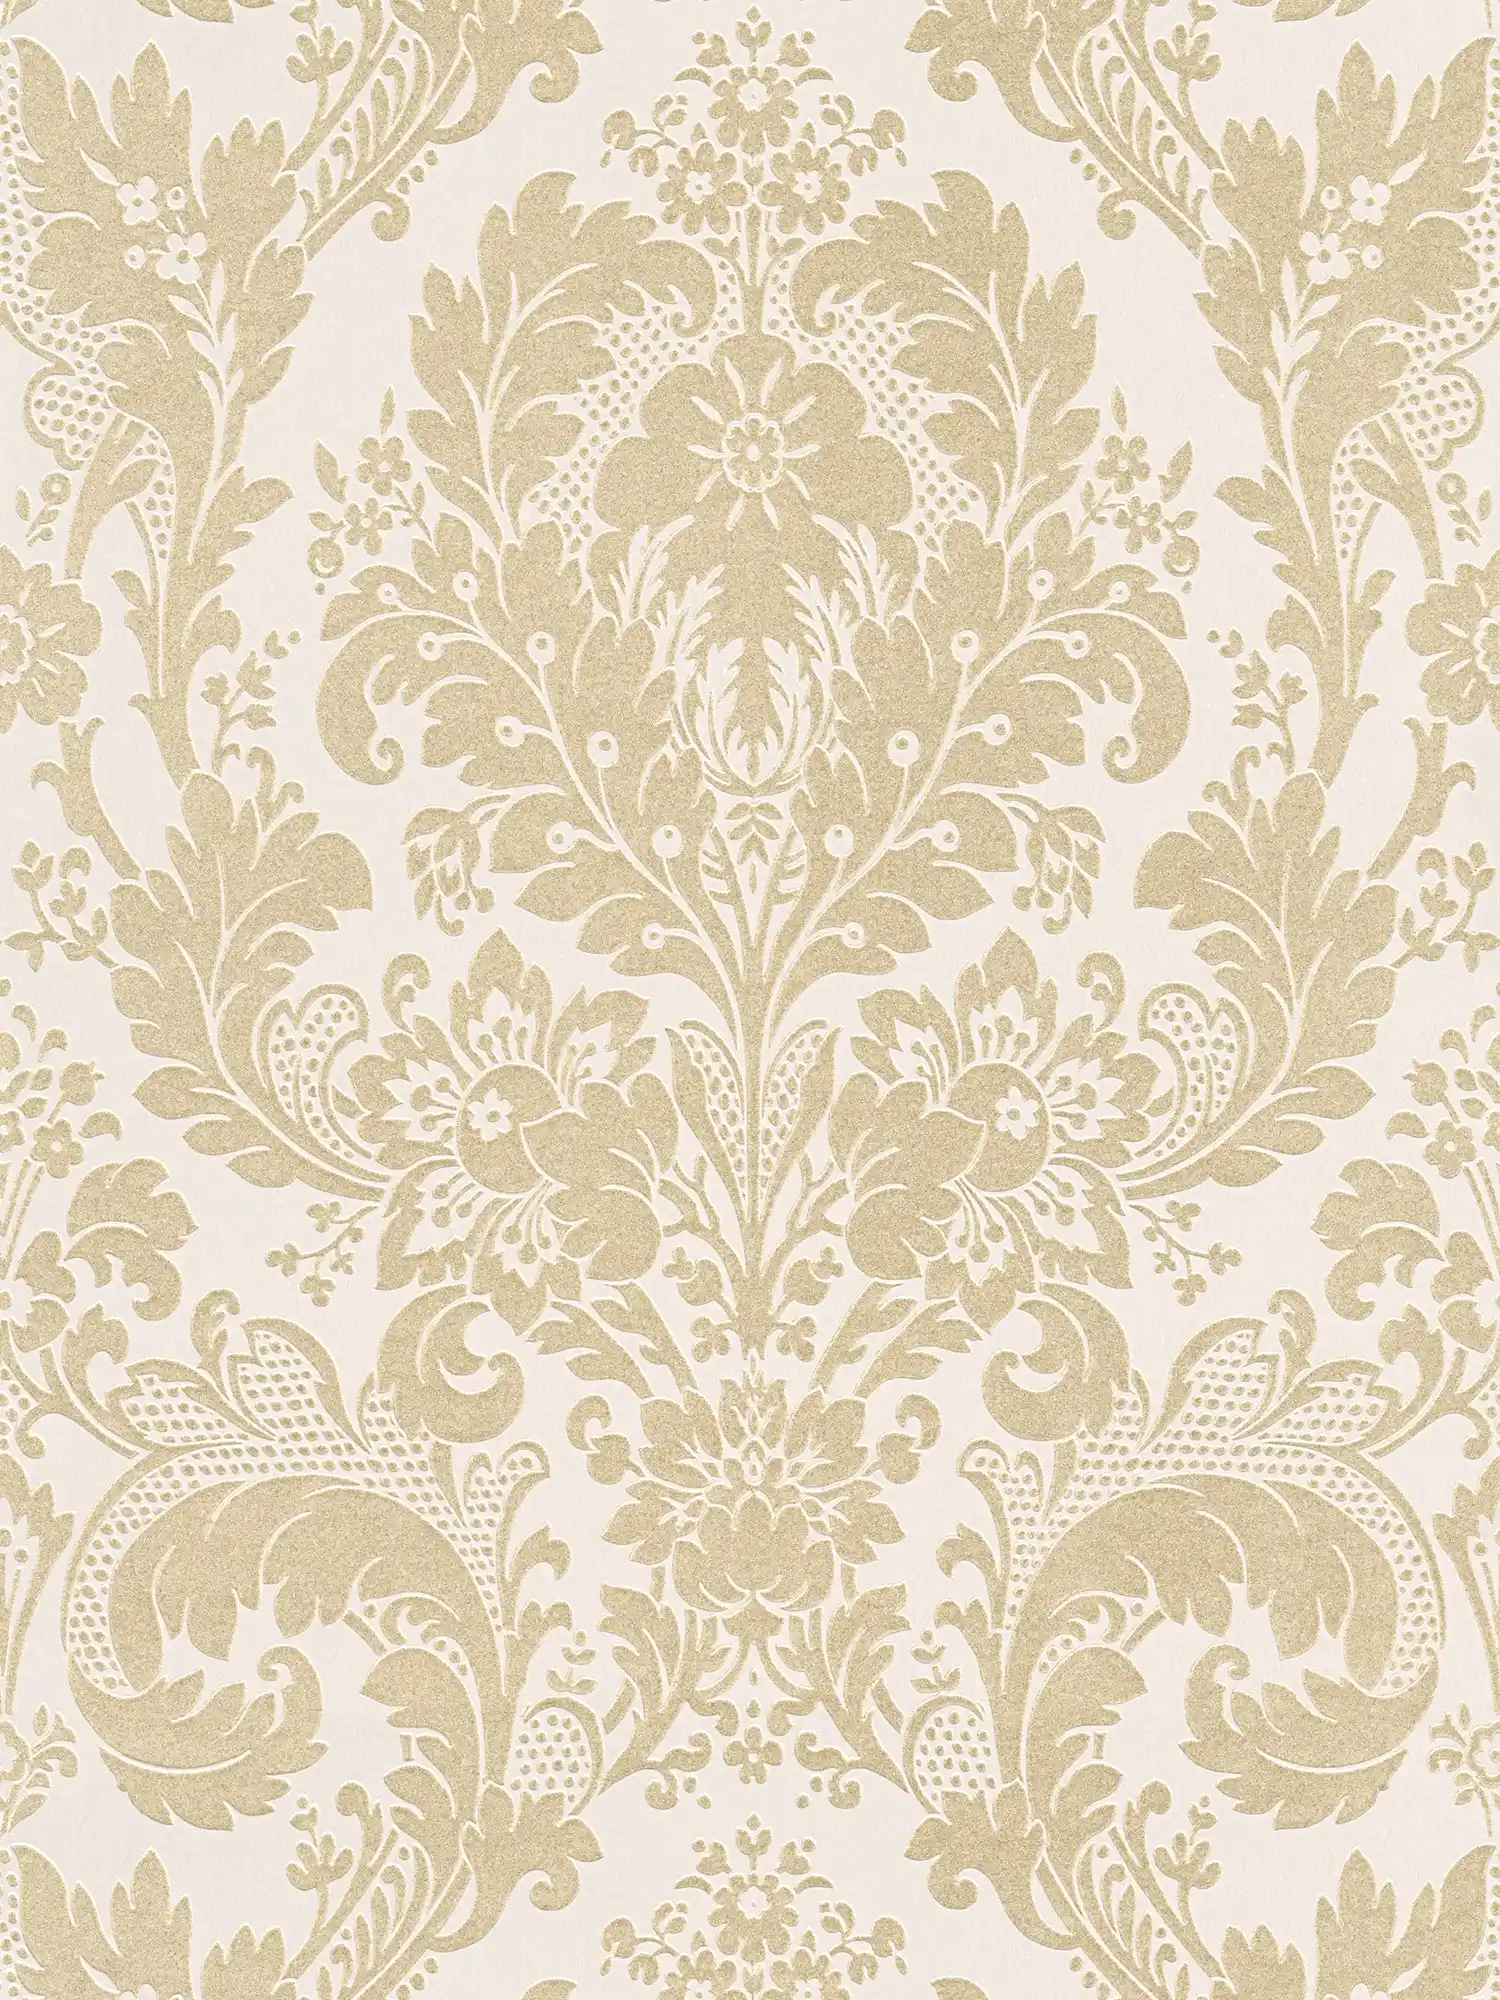 Baroque wallpaper gold ornaments floral with structure embossing
